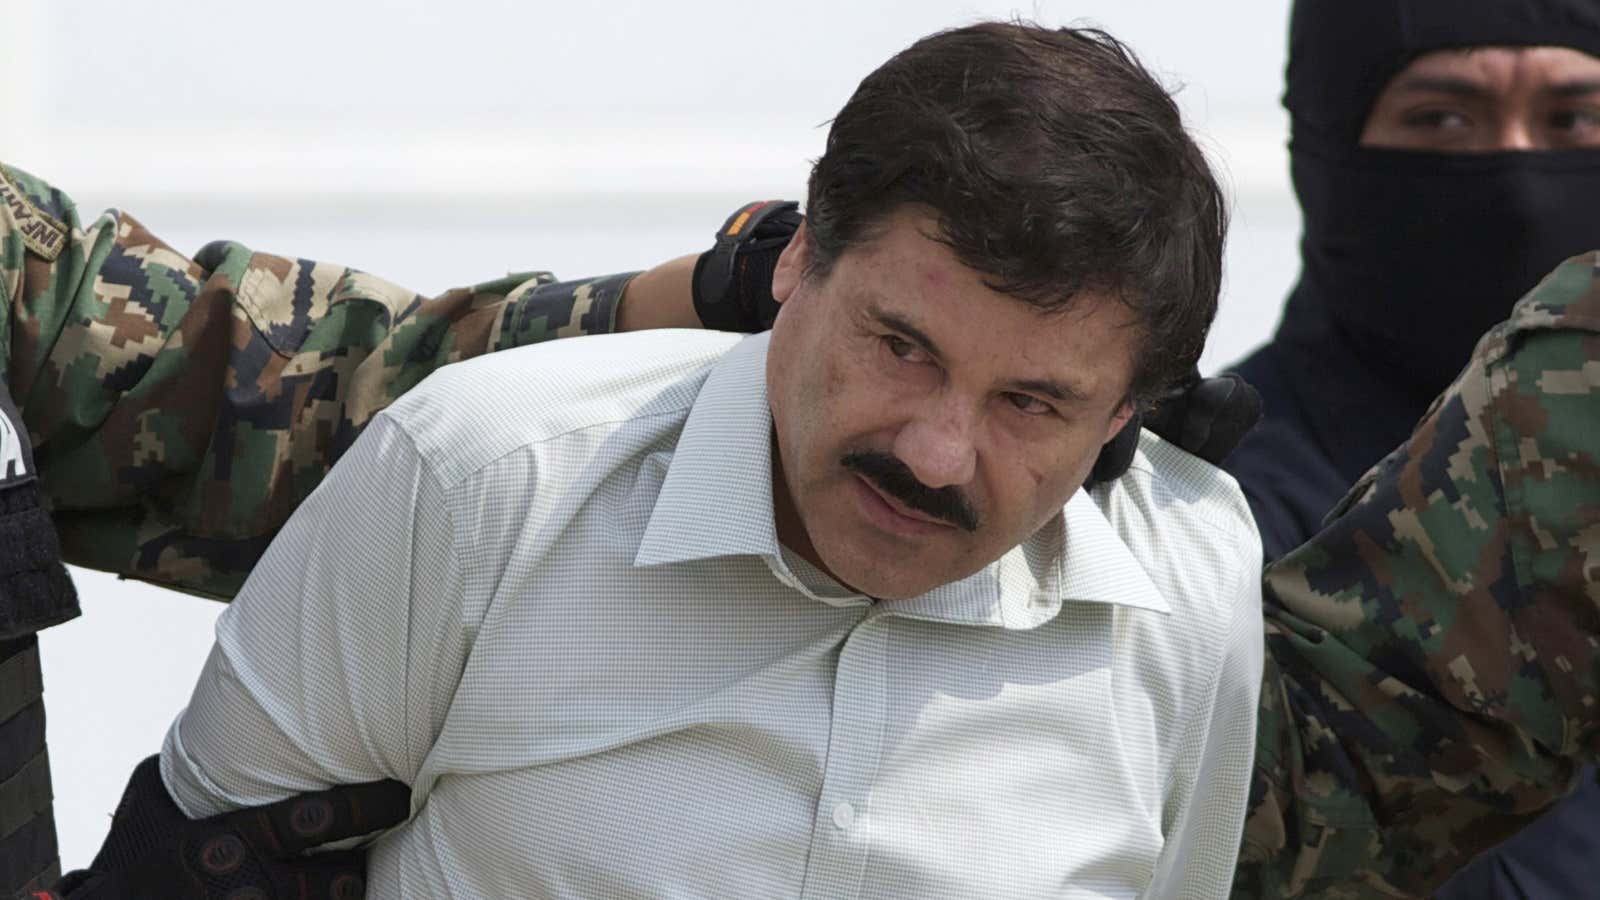 Even El Chapo looks to be headed to Brooklyn.